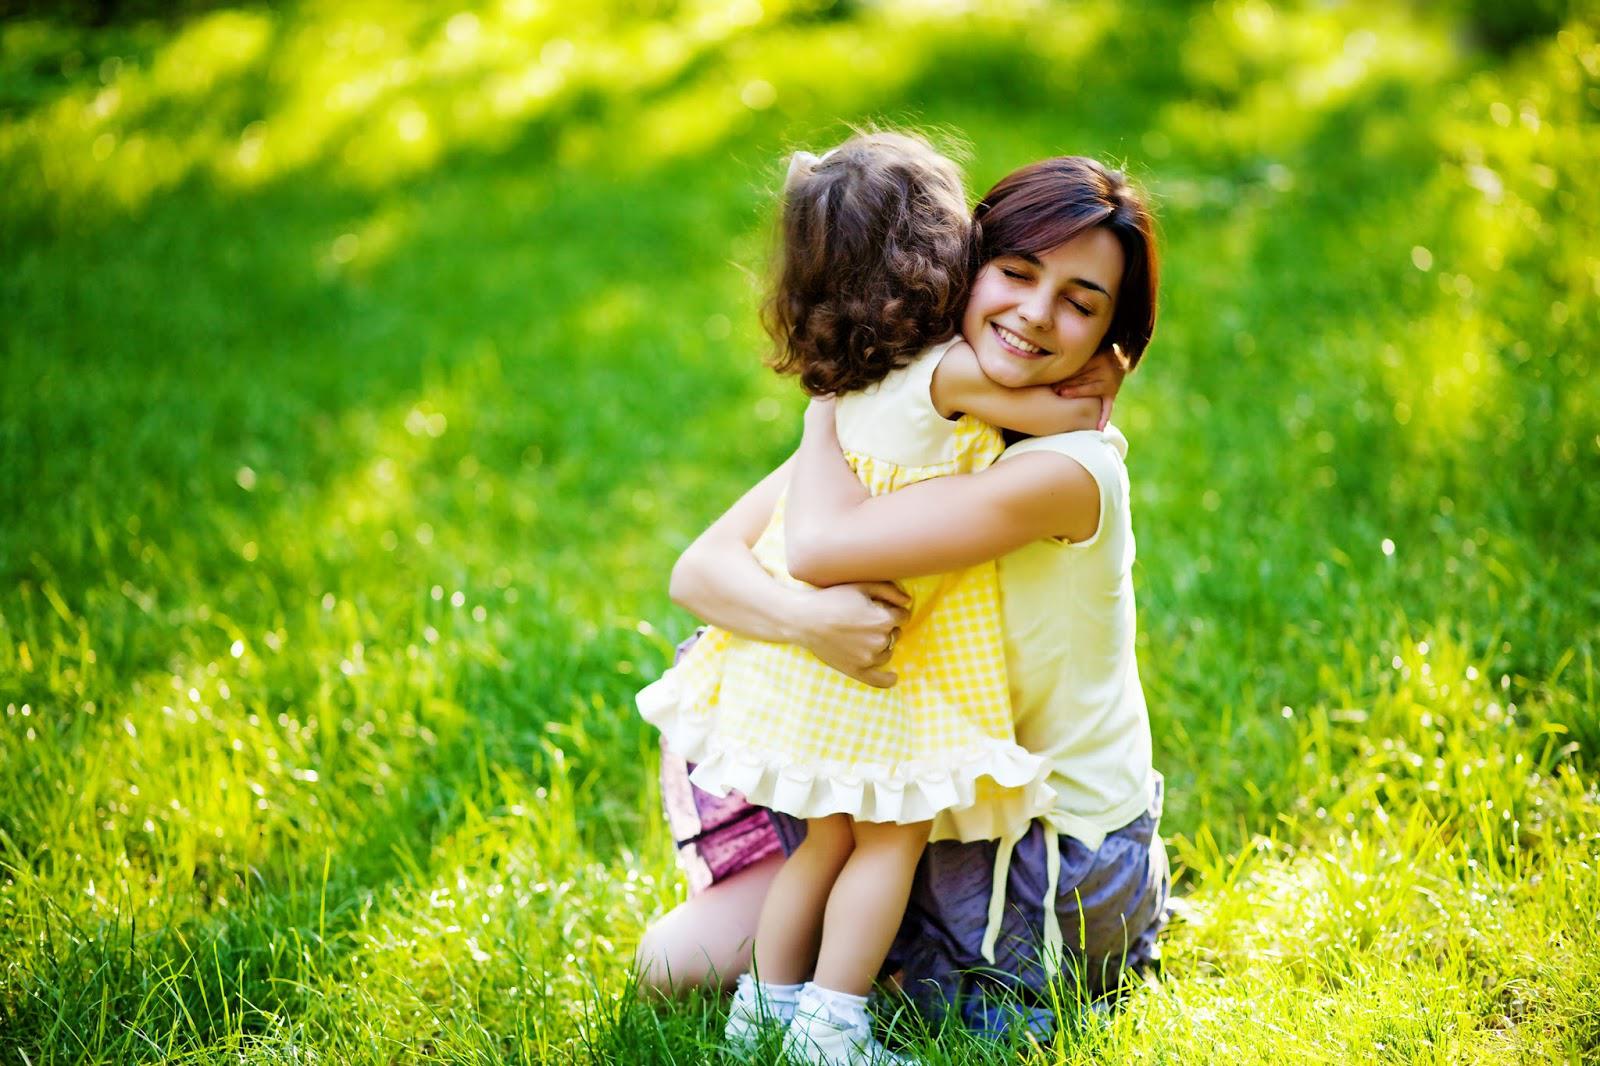 Loving hug of mother and daughter in wheat field, download.